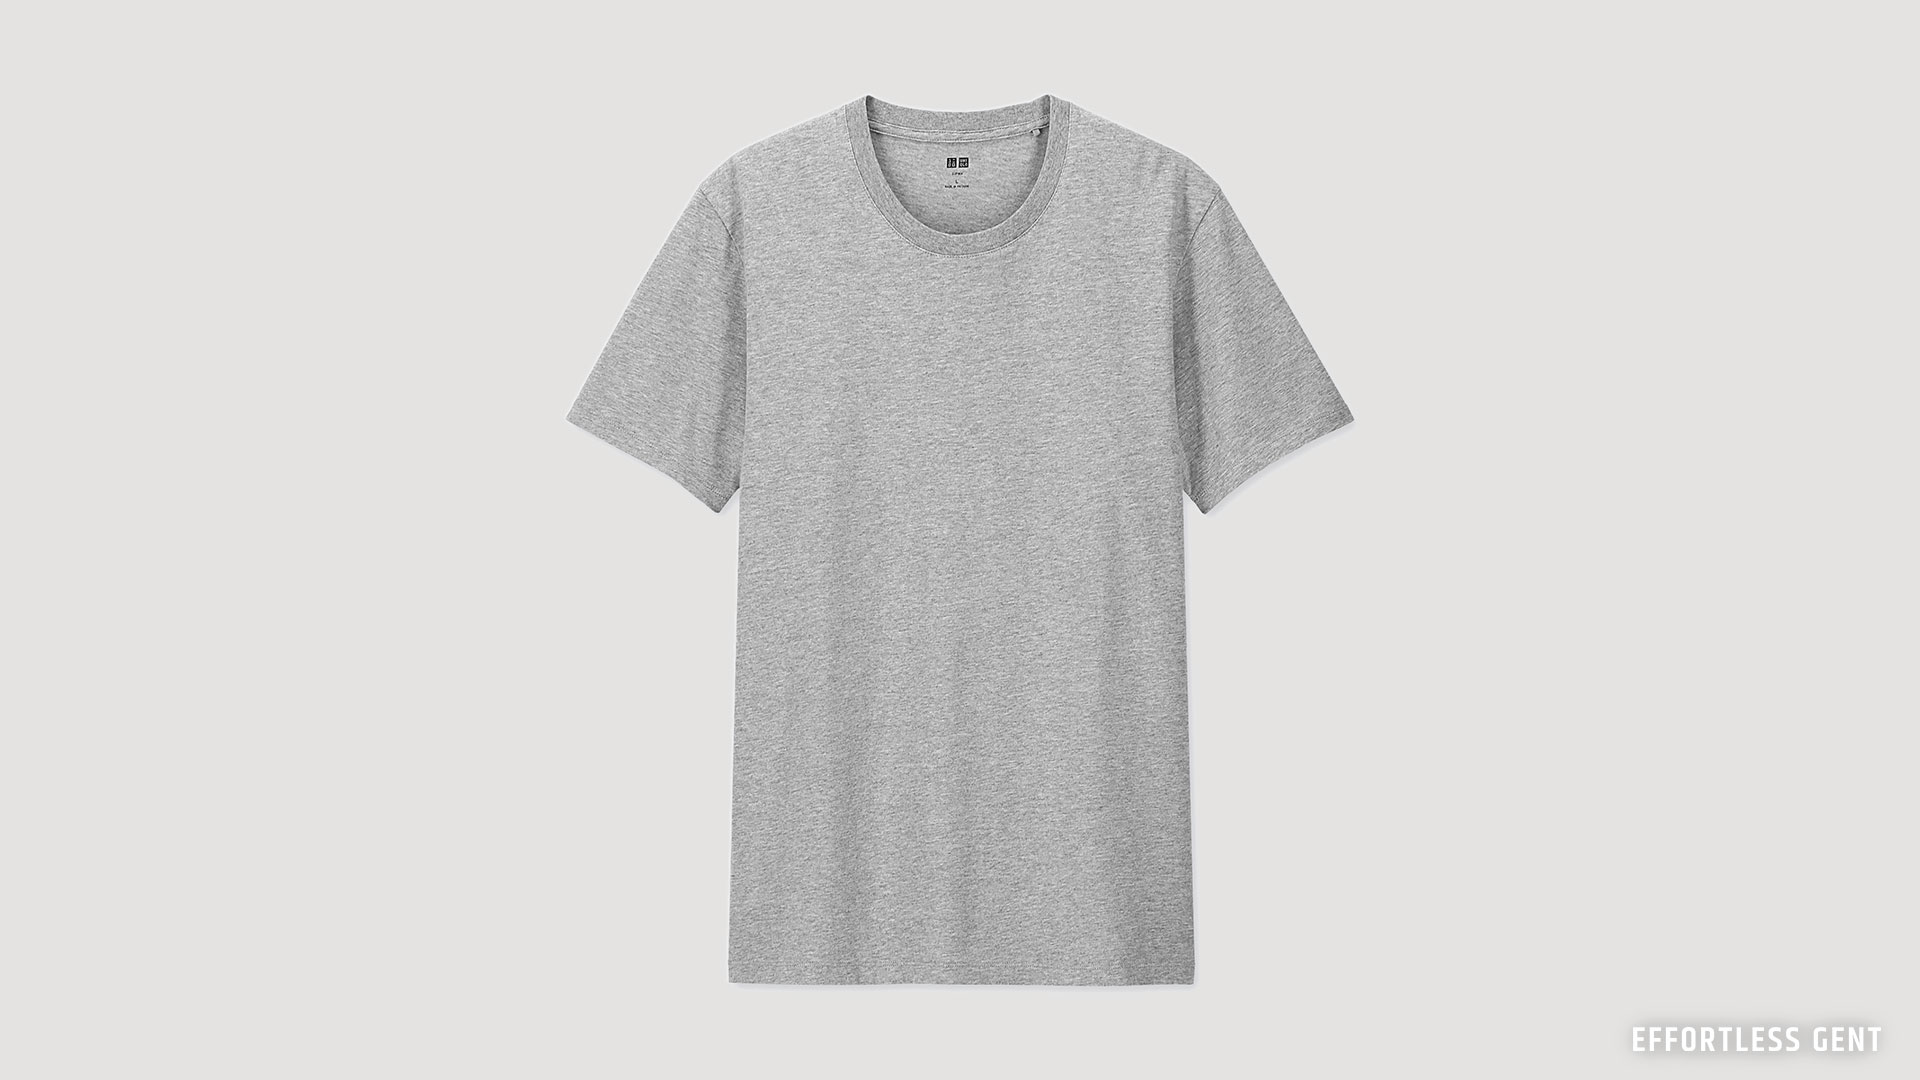 the perfect gray t-shirt for a budget minimal lean wardrobe